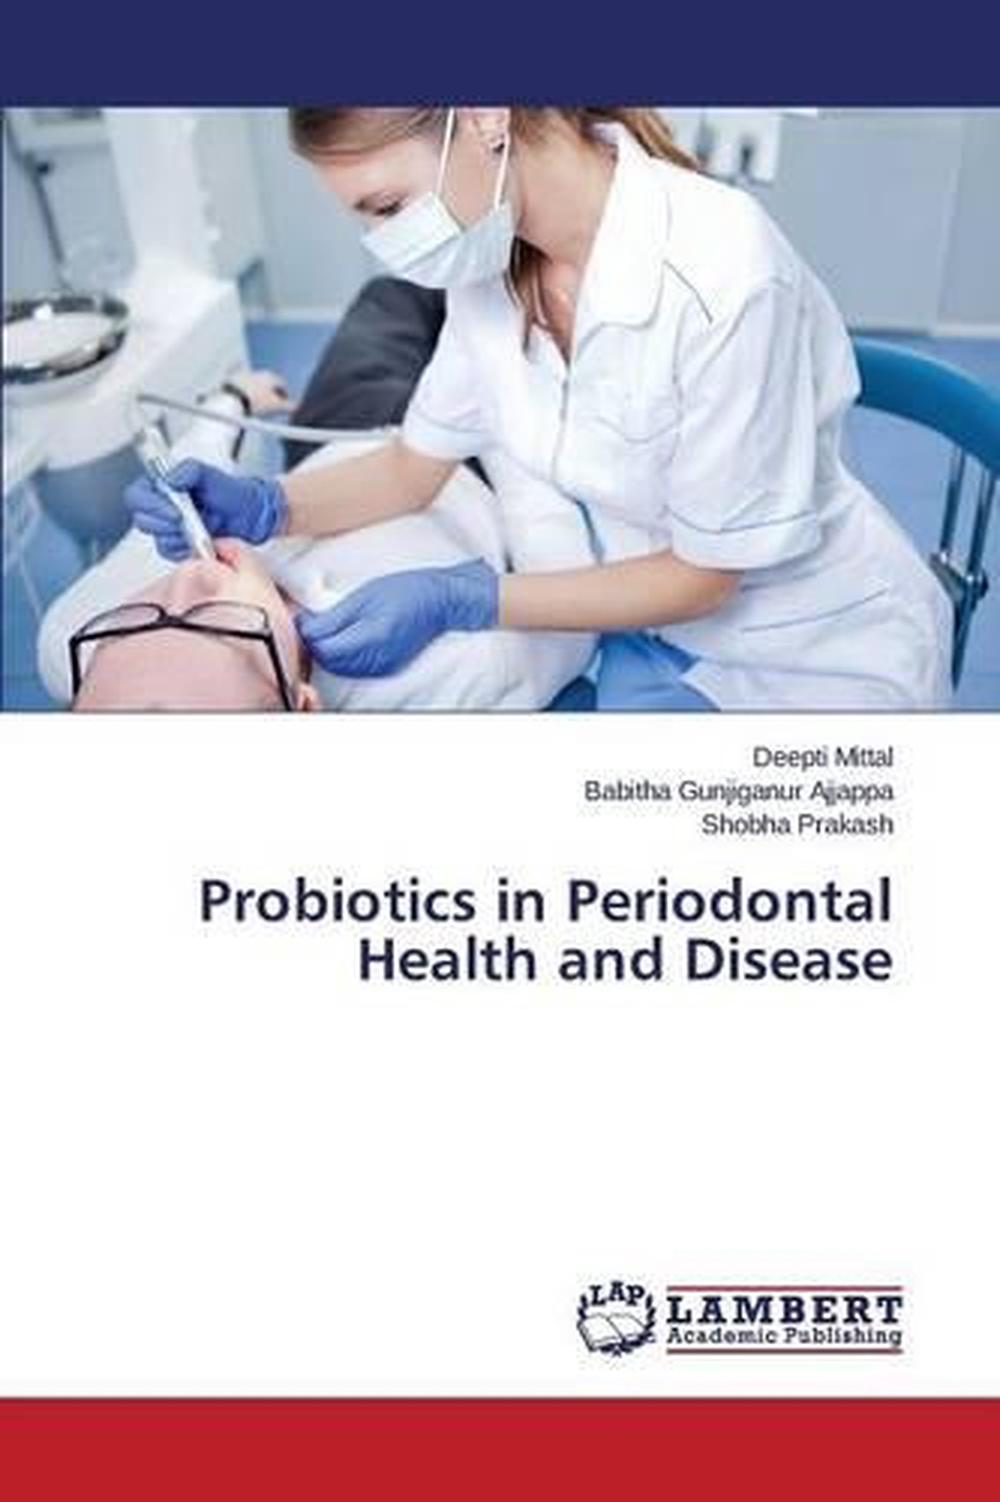 Probiotics in Periodontal Health and Disease by Mittal Deepti (English ...